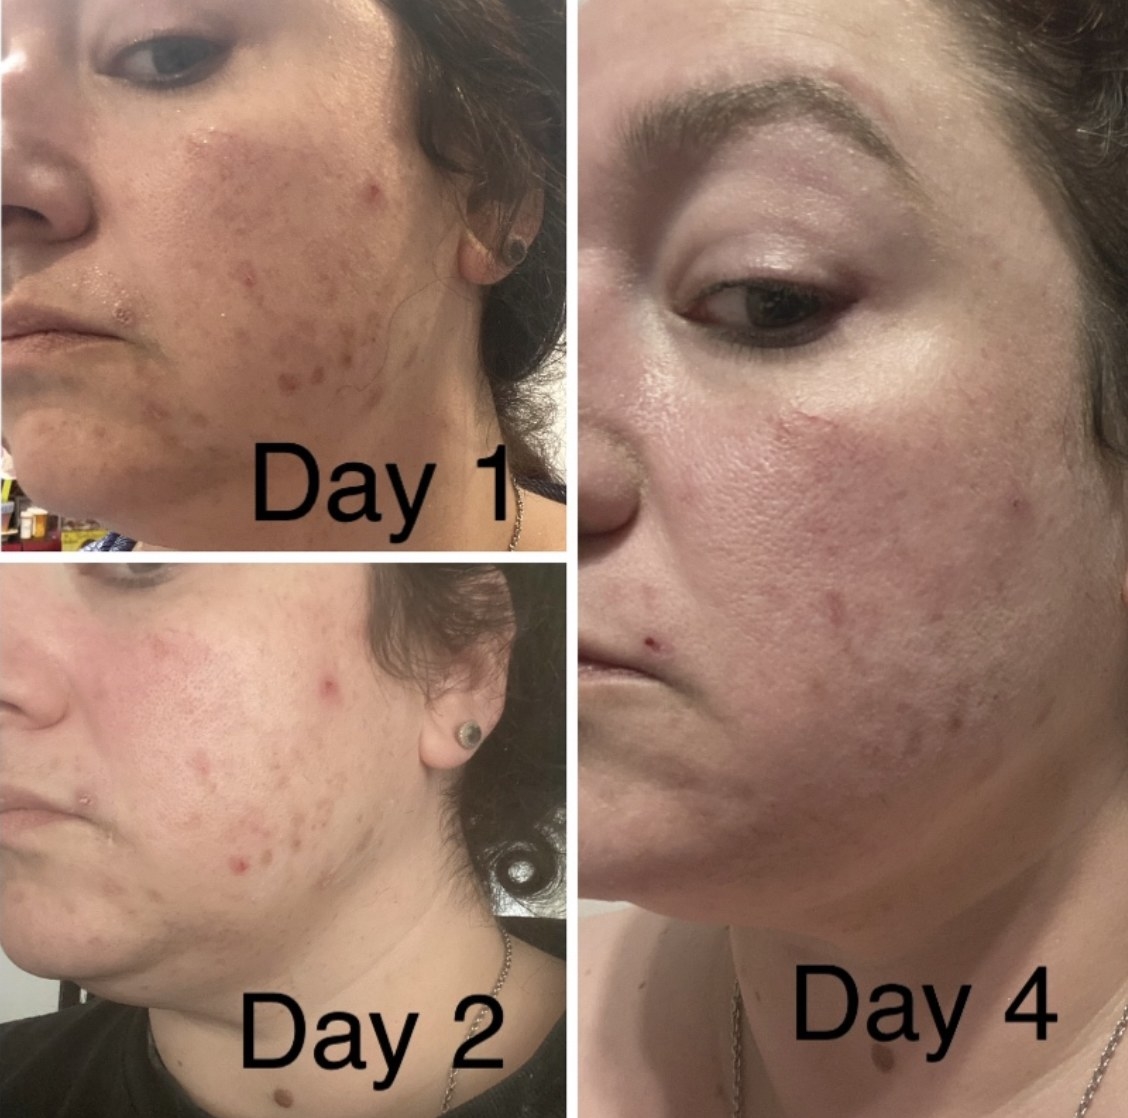 before and after four days of using the acne treatment